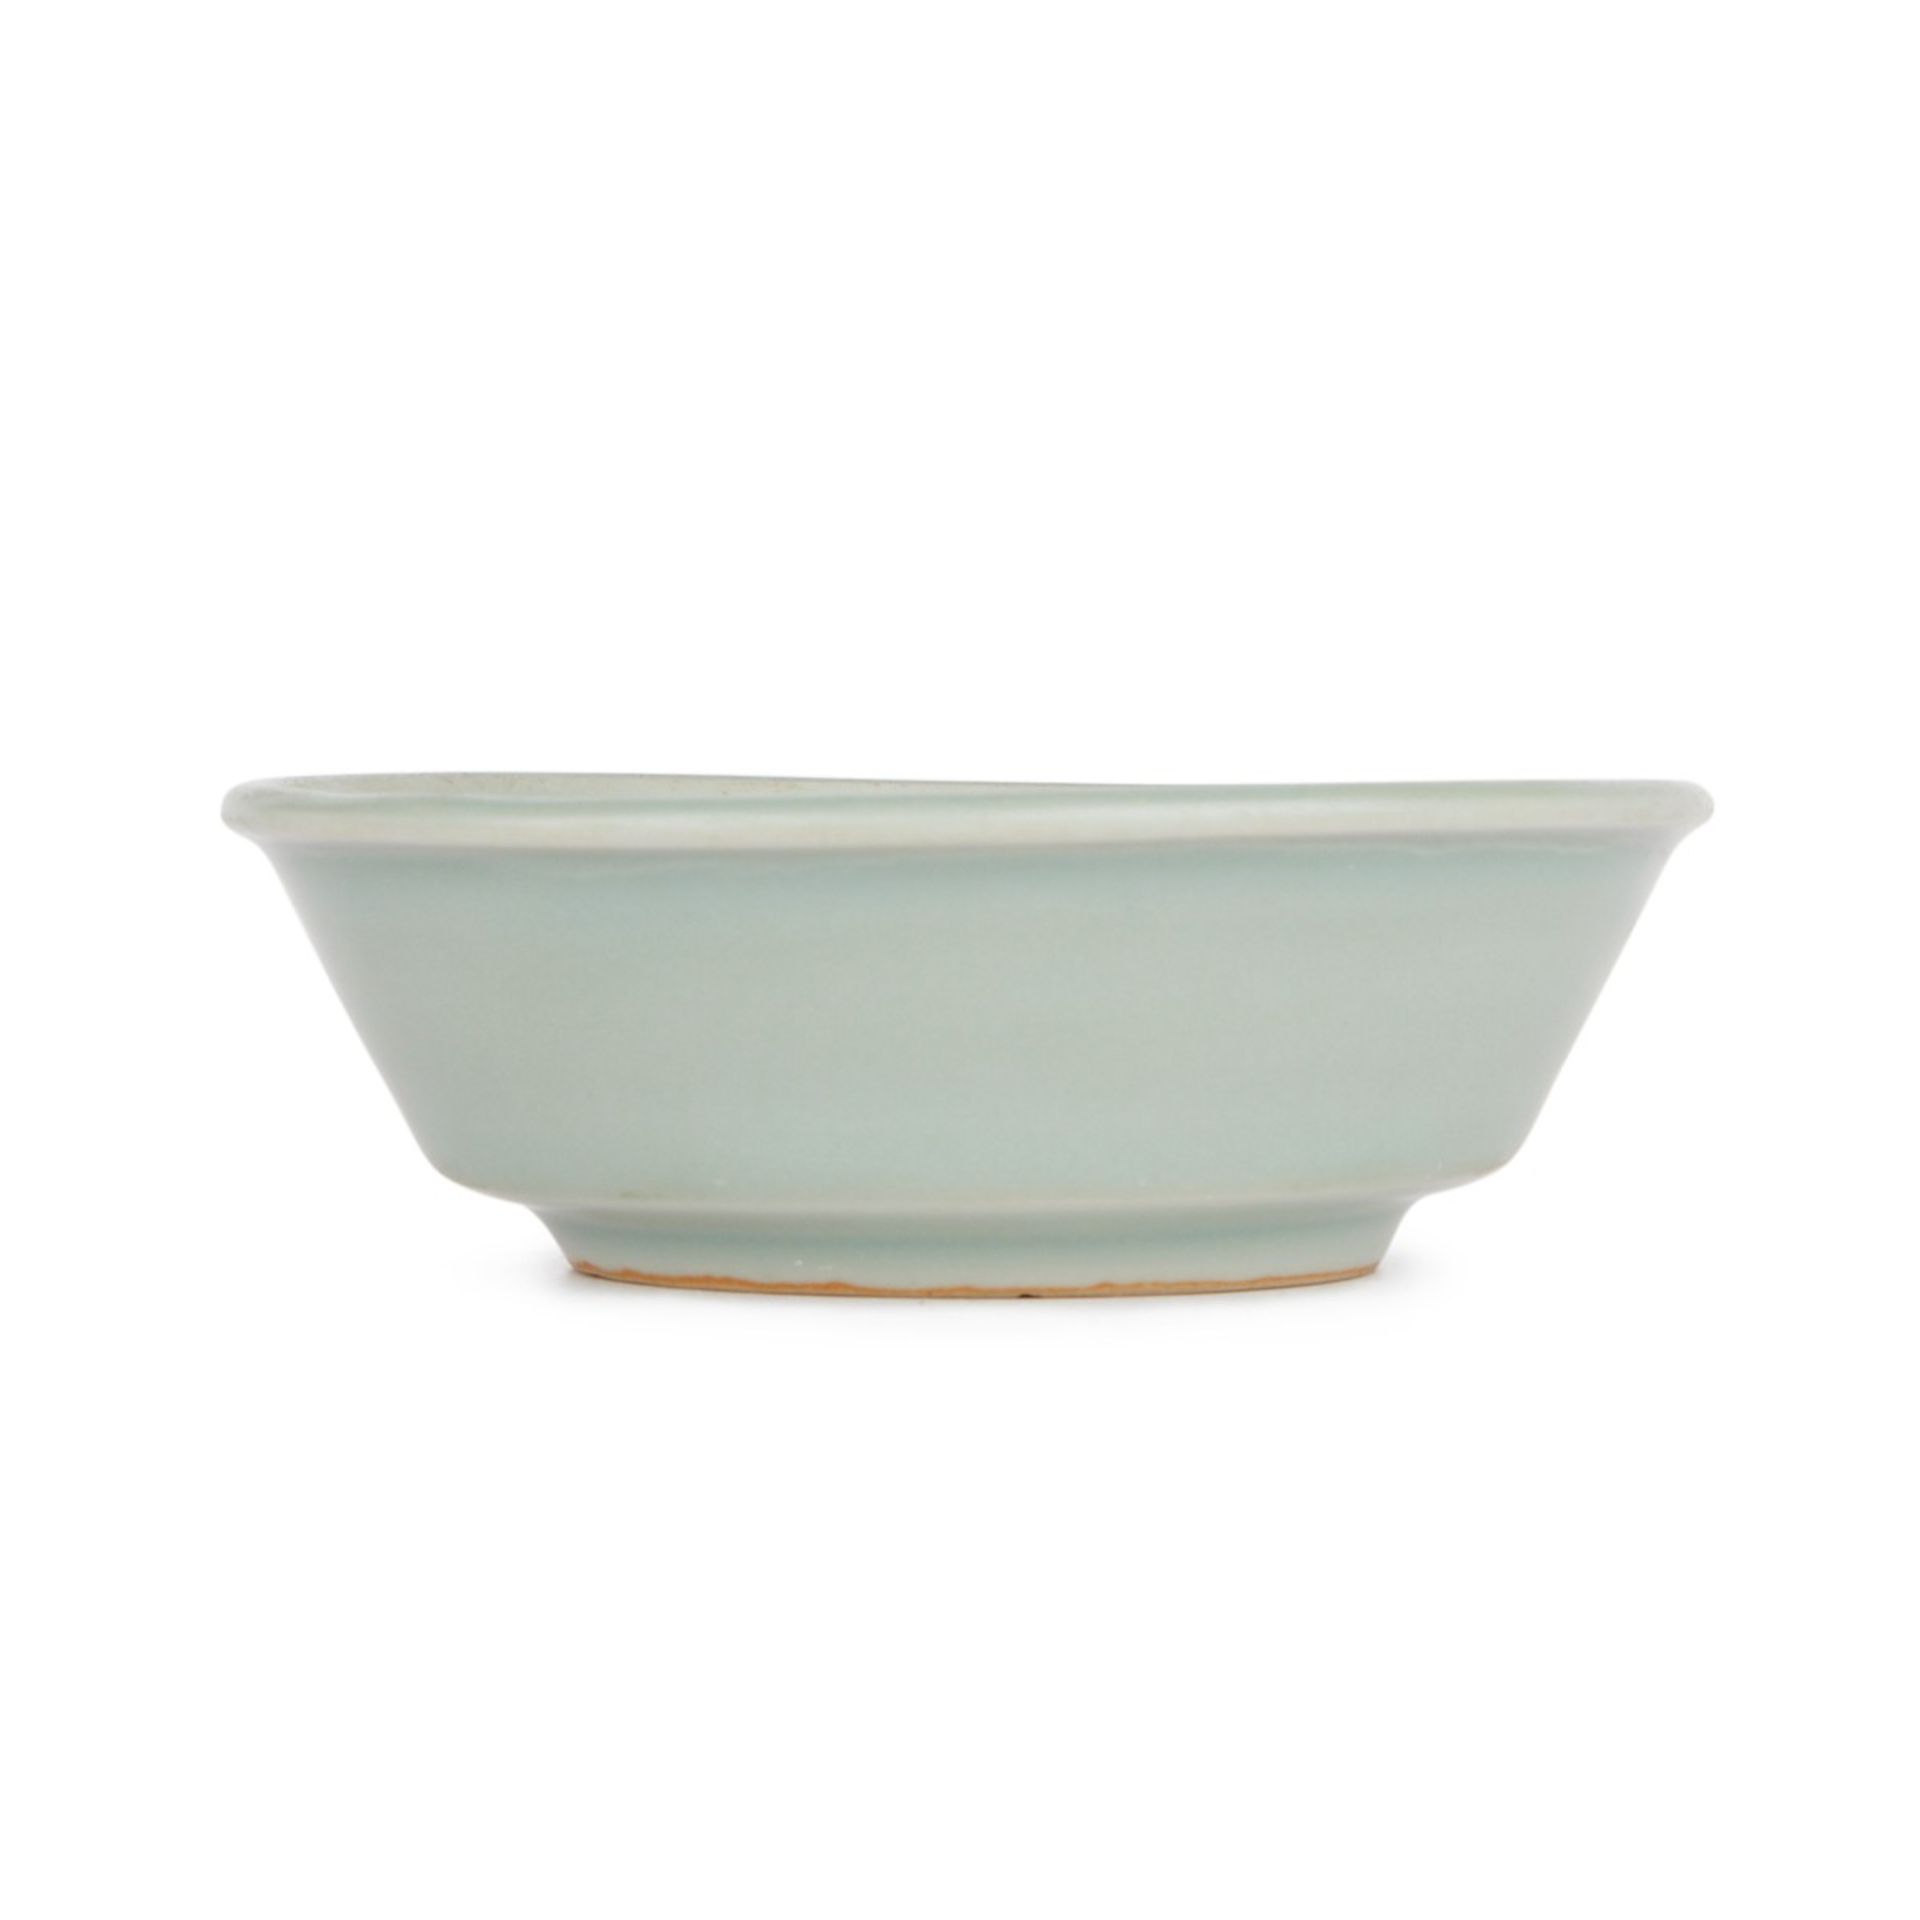 Early Chinese Celadon Porcelain Bowl - Likely Yuan - Image 9 of 9